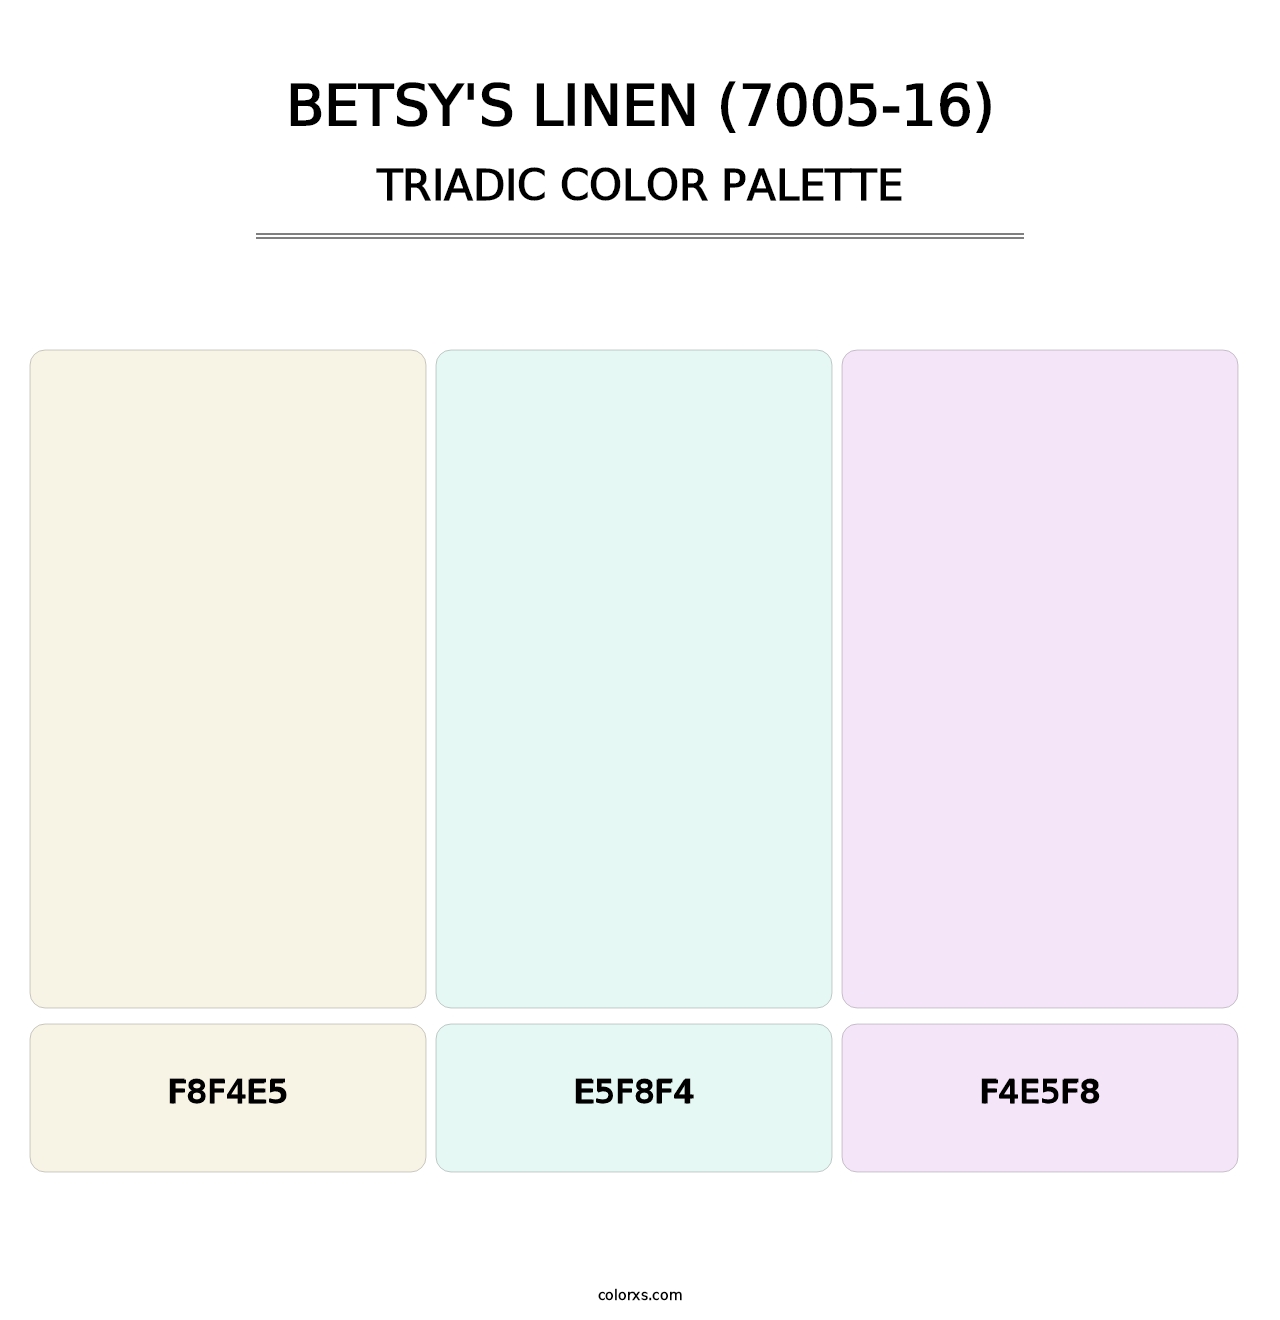 Betsy's Linen (7005-16) - Triadic Color Palette